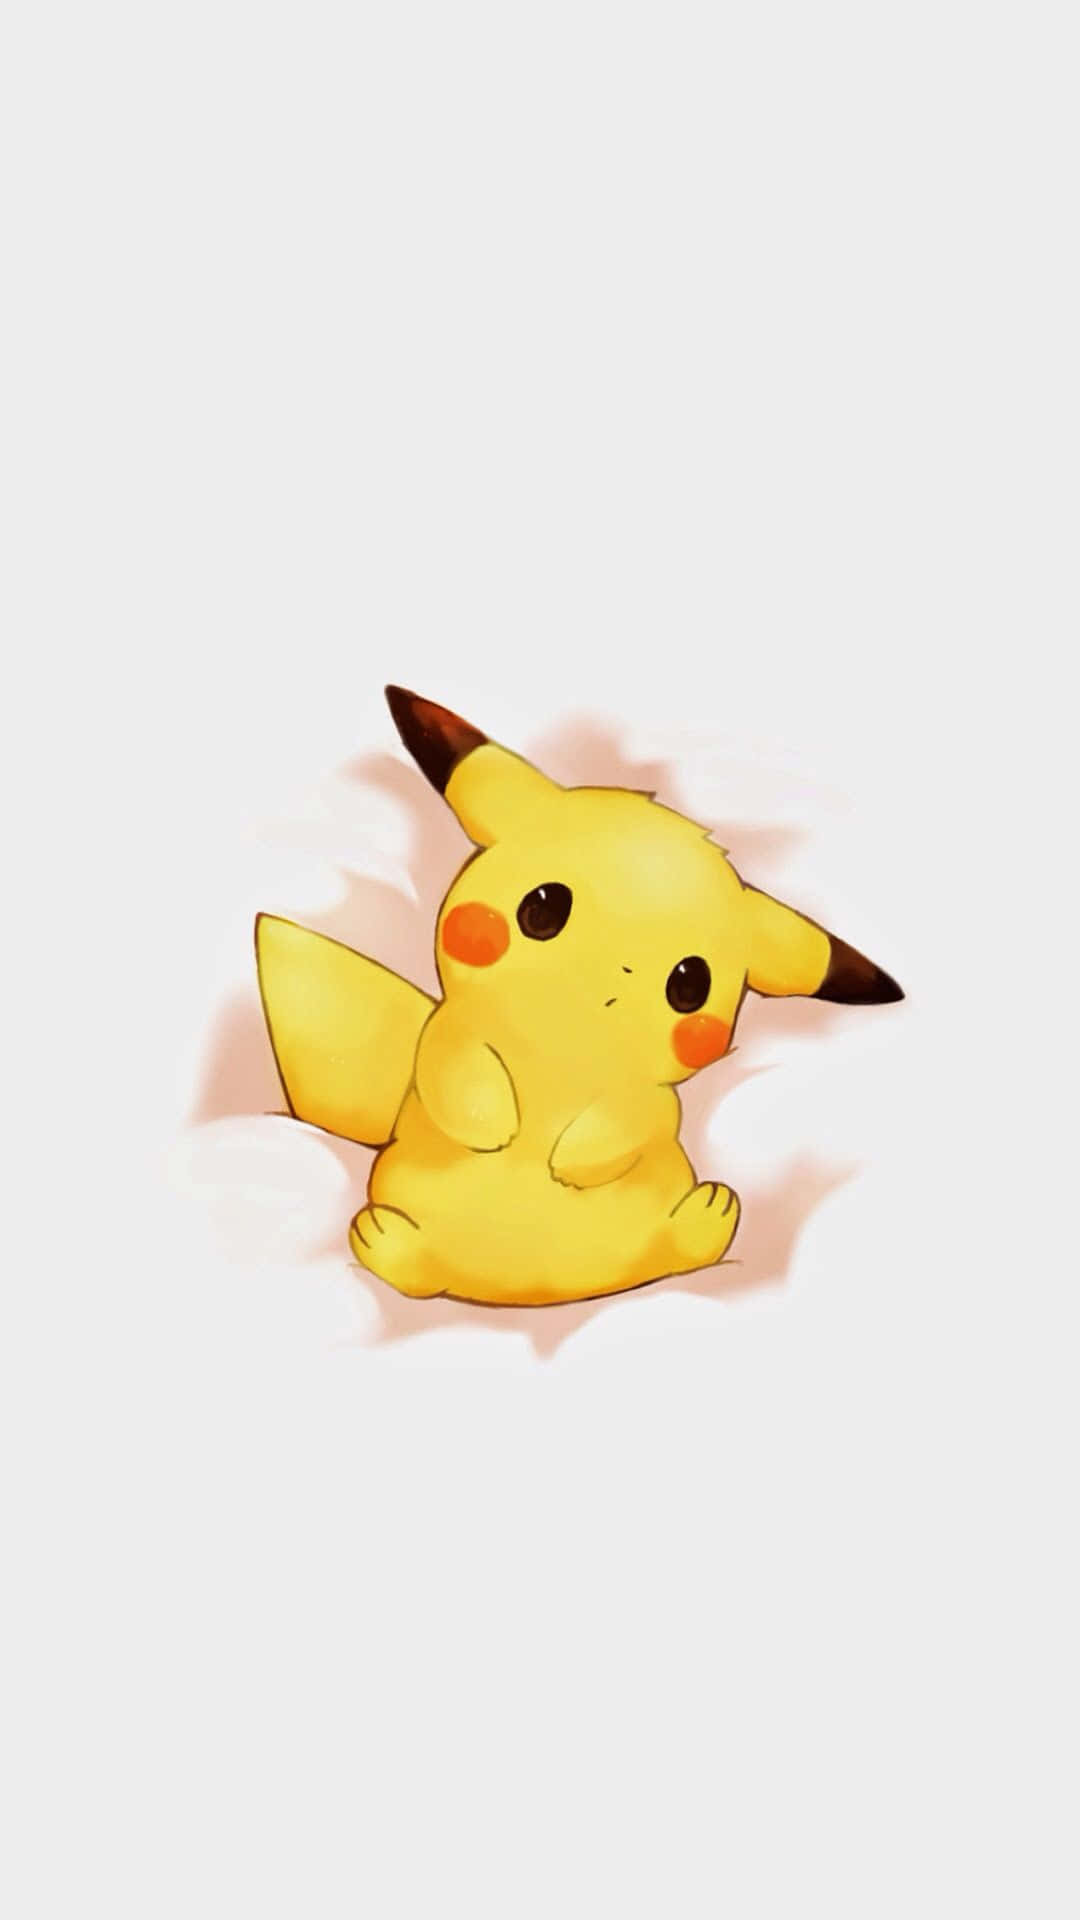 Pikachu Laying On A Bed With A Pillow Wallpaper